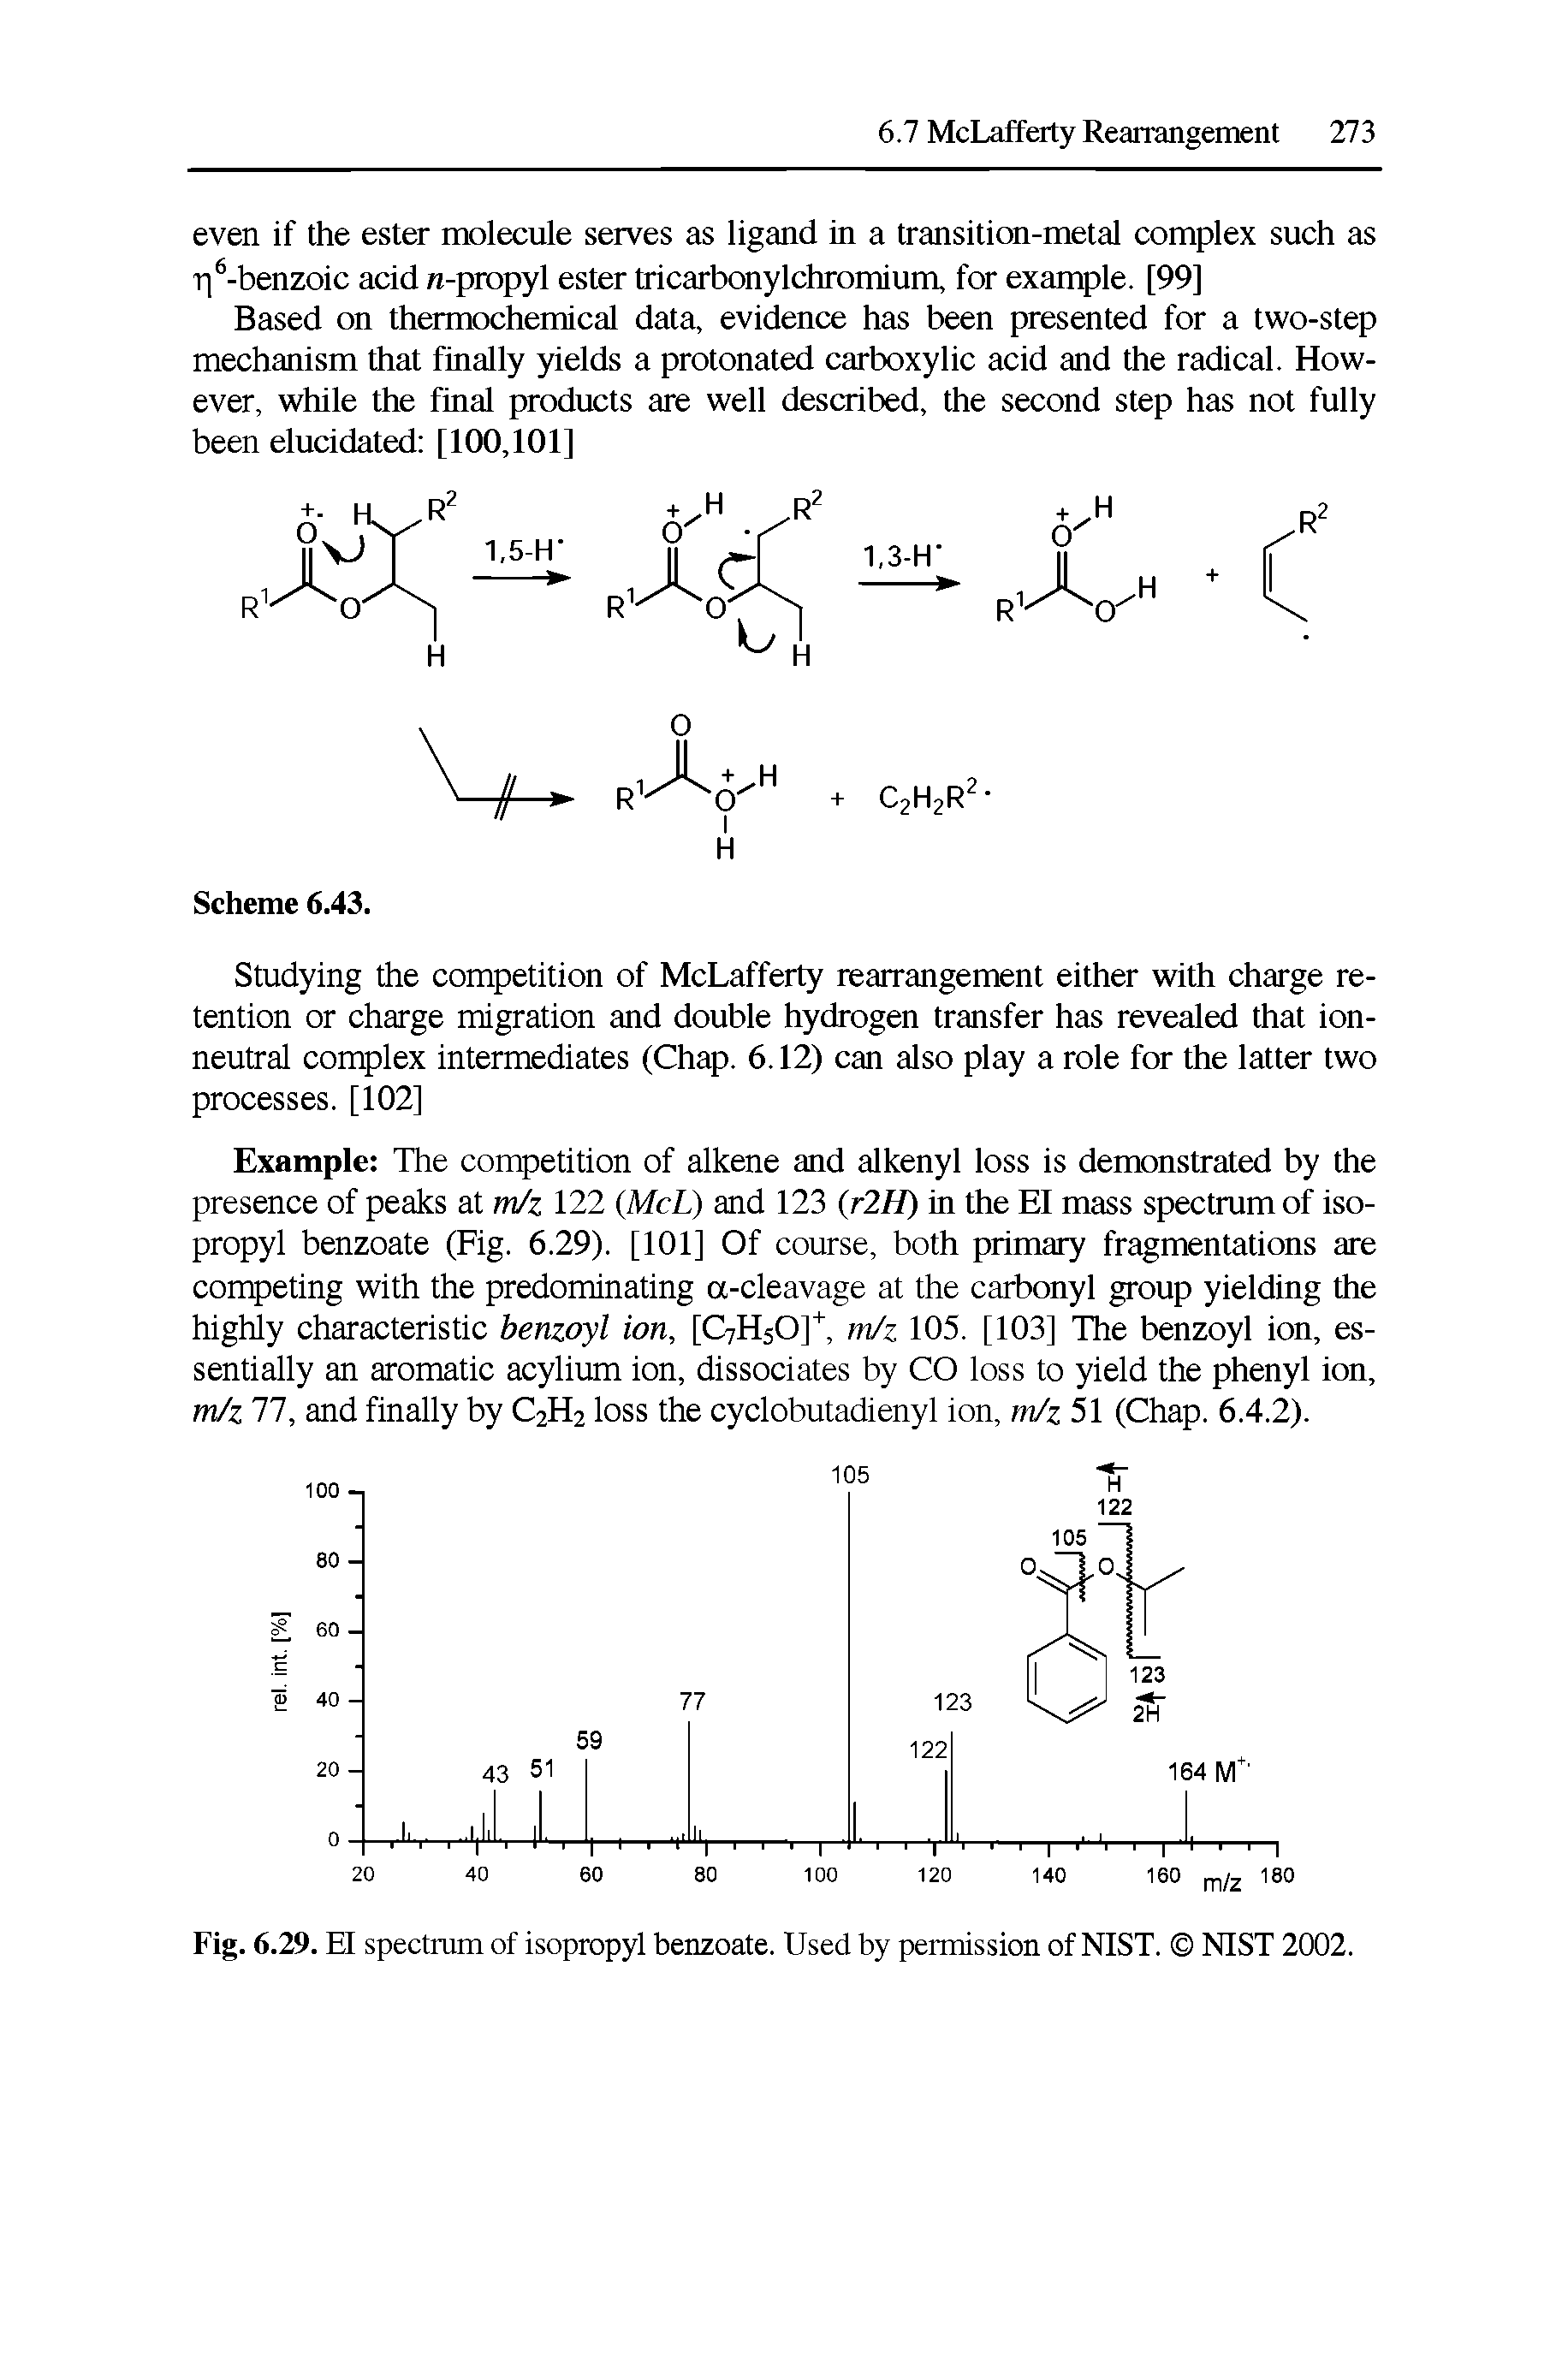 Fig. 6.29. El spectmm of isopropyl benzoate. Used by permission of NIST. NIST 2002.